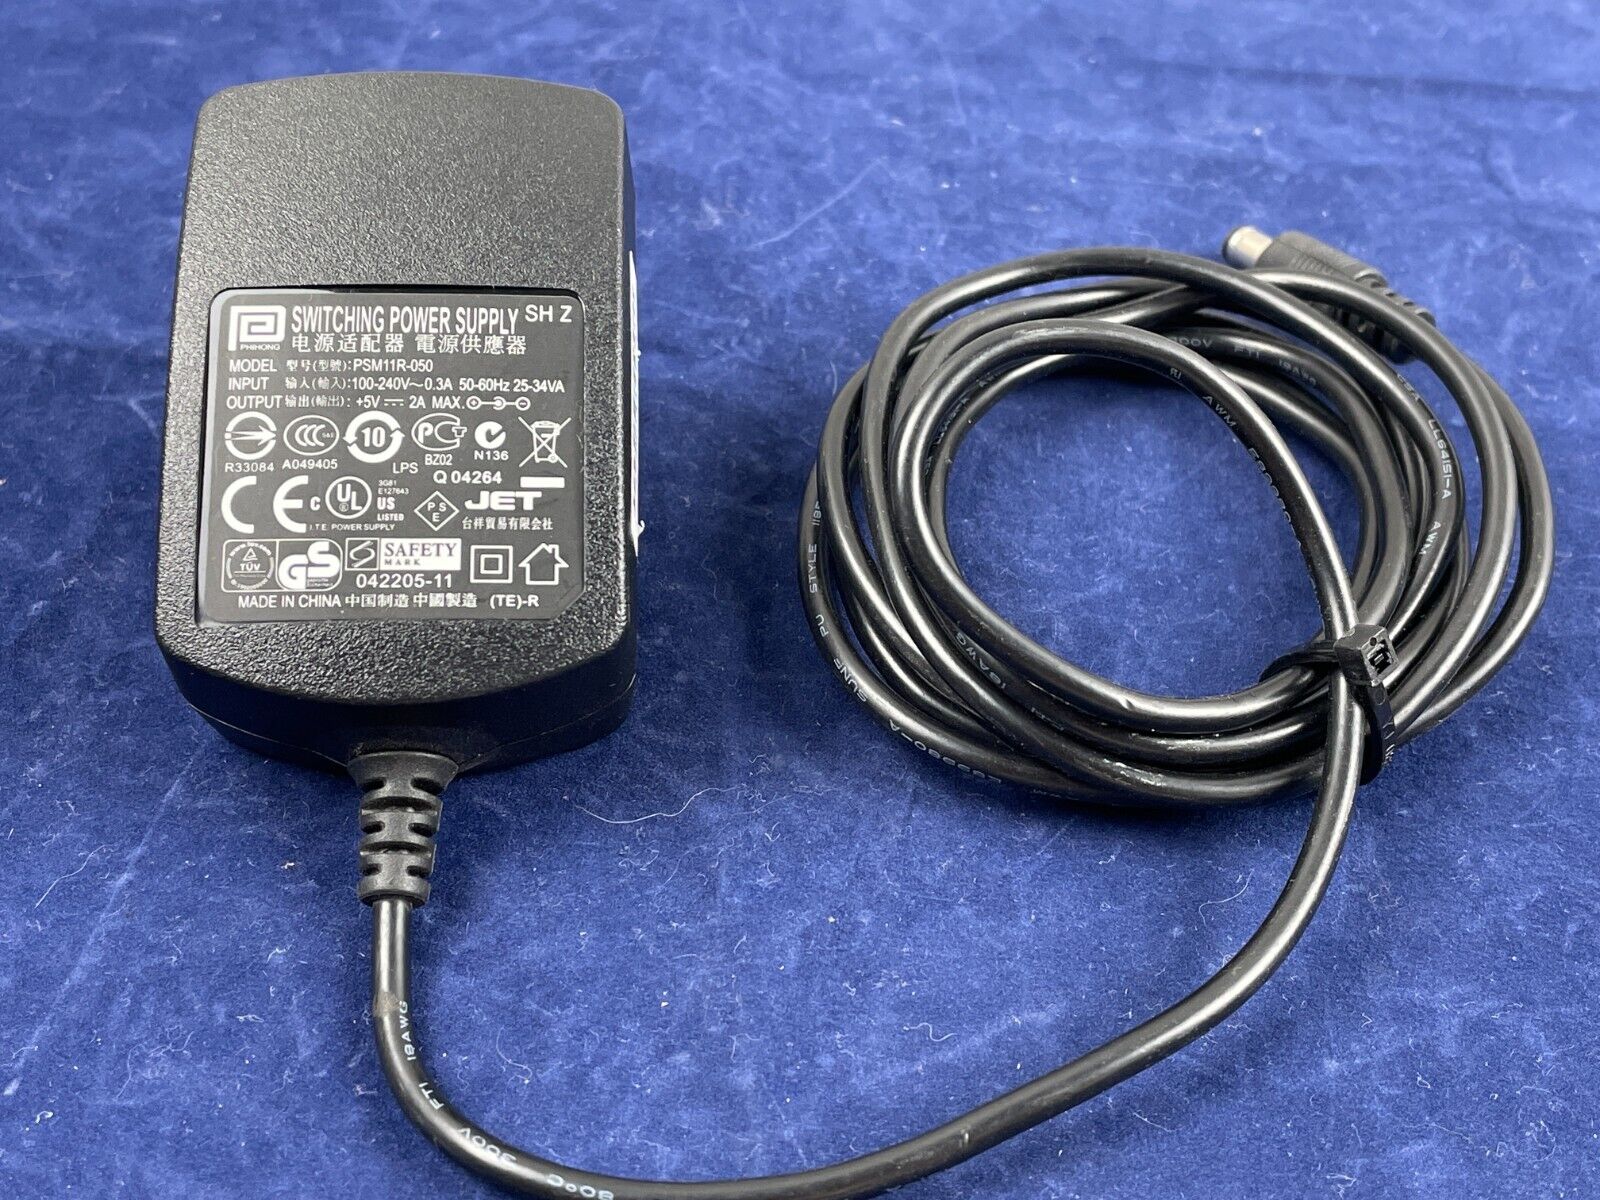 PHIHONG PSM11R-050 100-240V SWITCHING 5V 2A AC POWER SUPPLY ADAPTER 5.5 x 2.5MM Type: AC/DC Adapter MPN: PSM11R-050